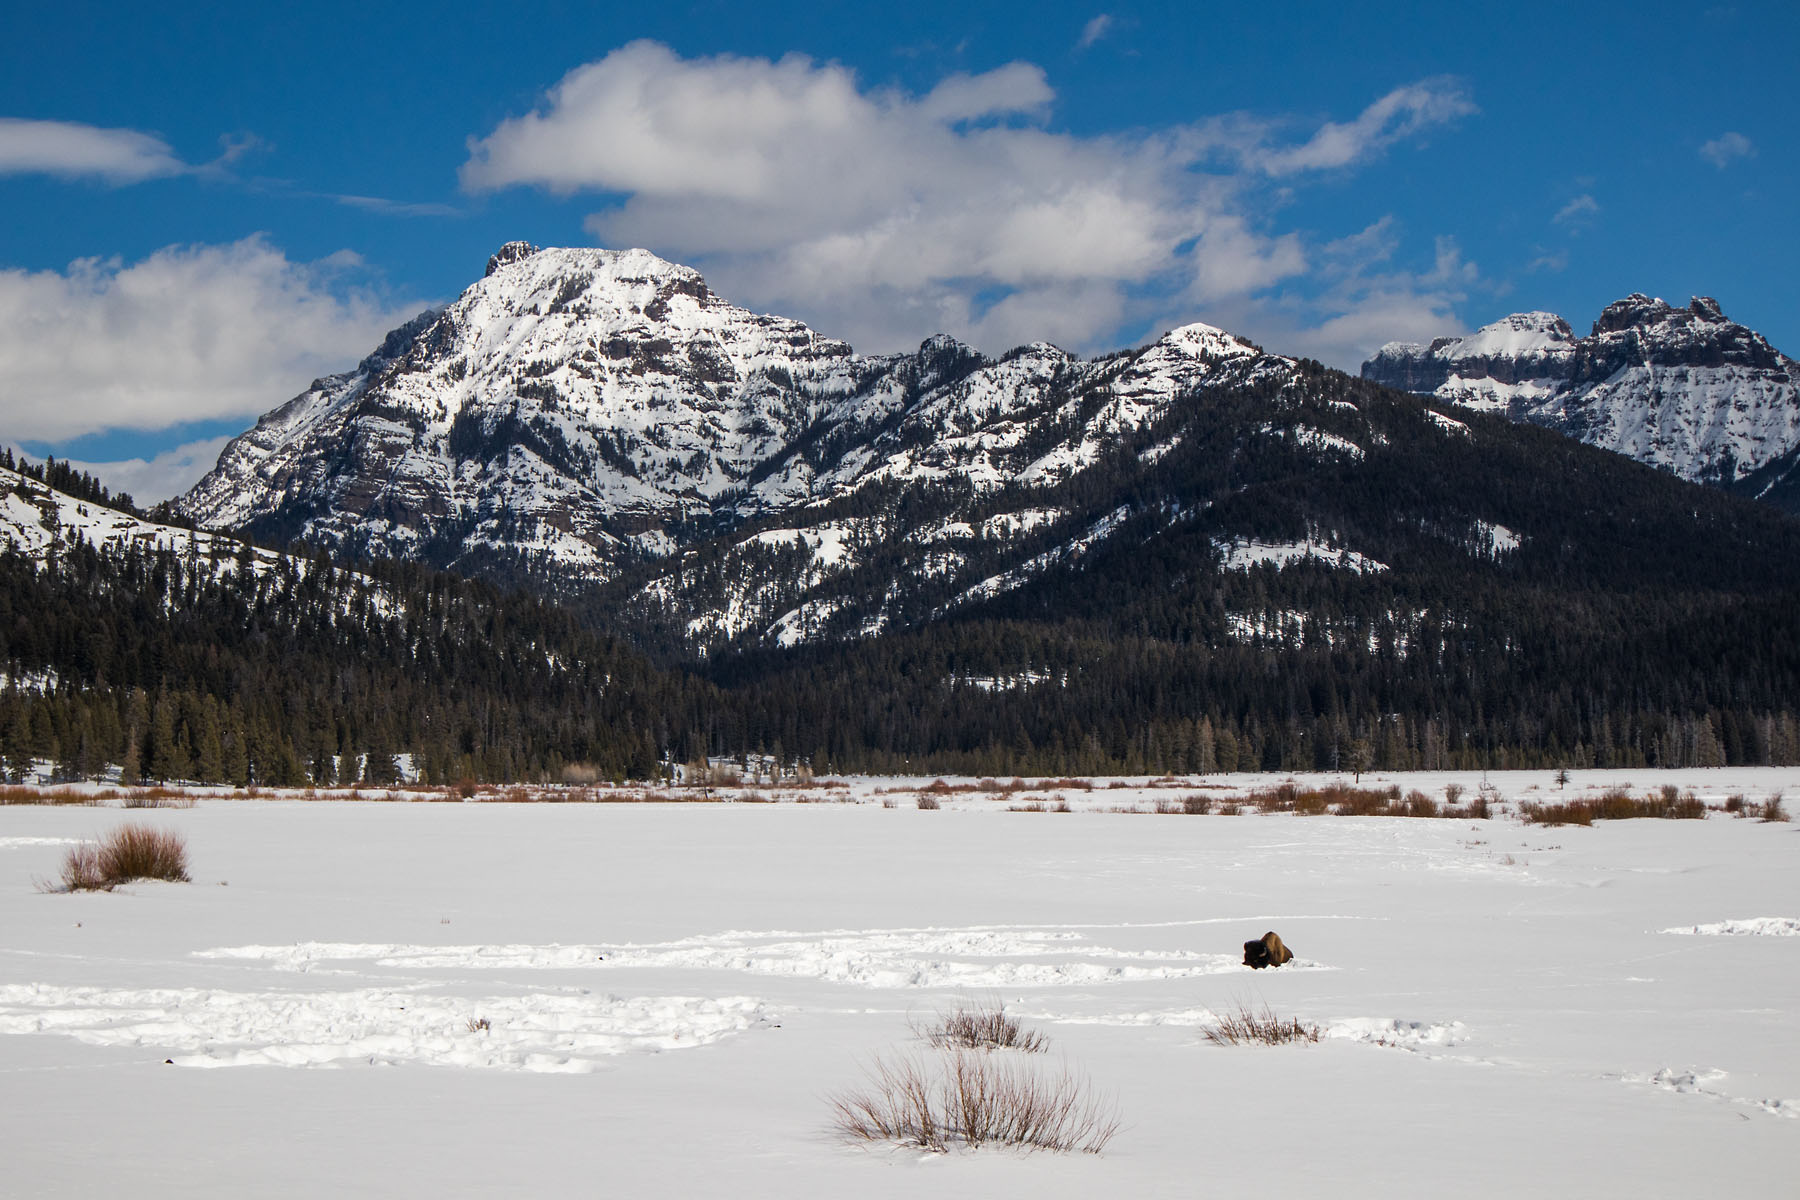 Bison taking a snow nap, Lamar Valley, Yellowstone.  Click for next photo.